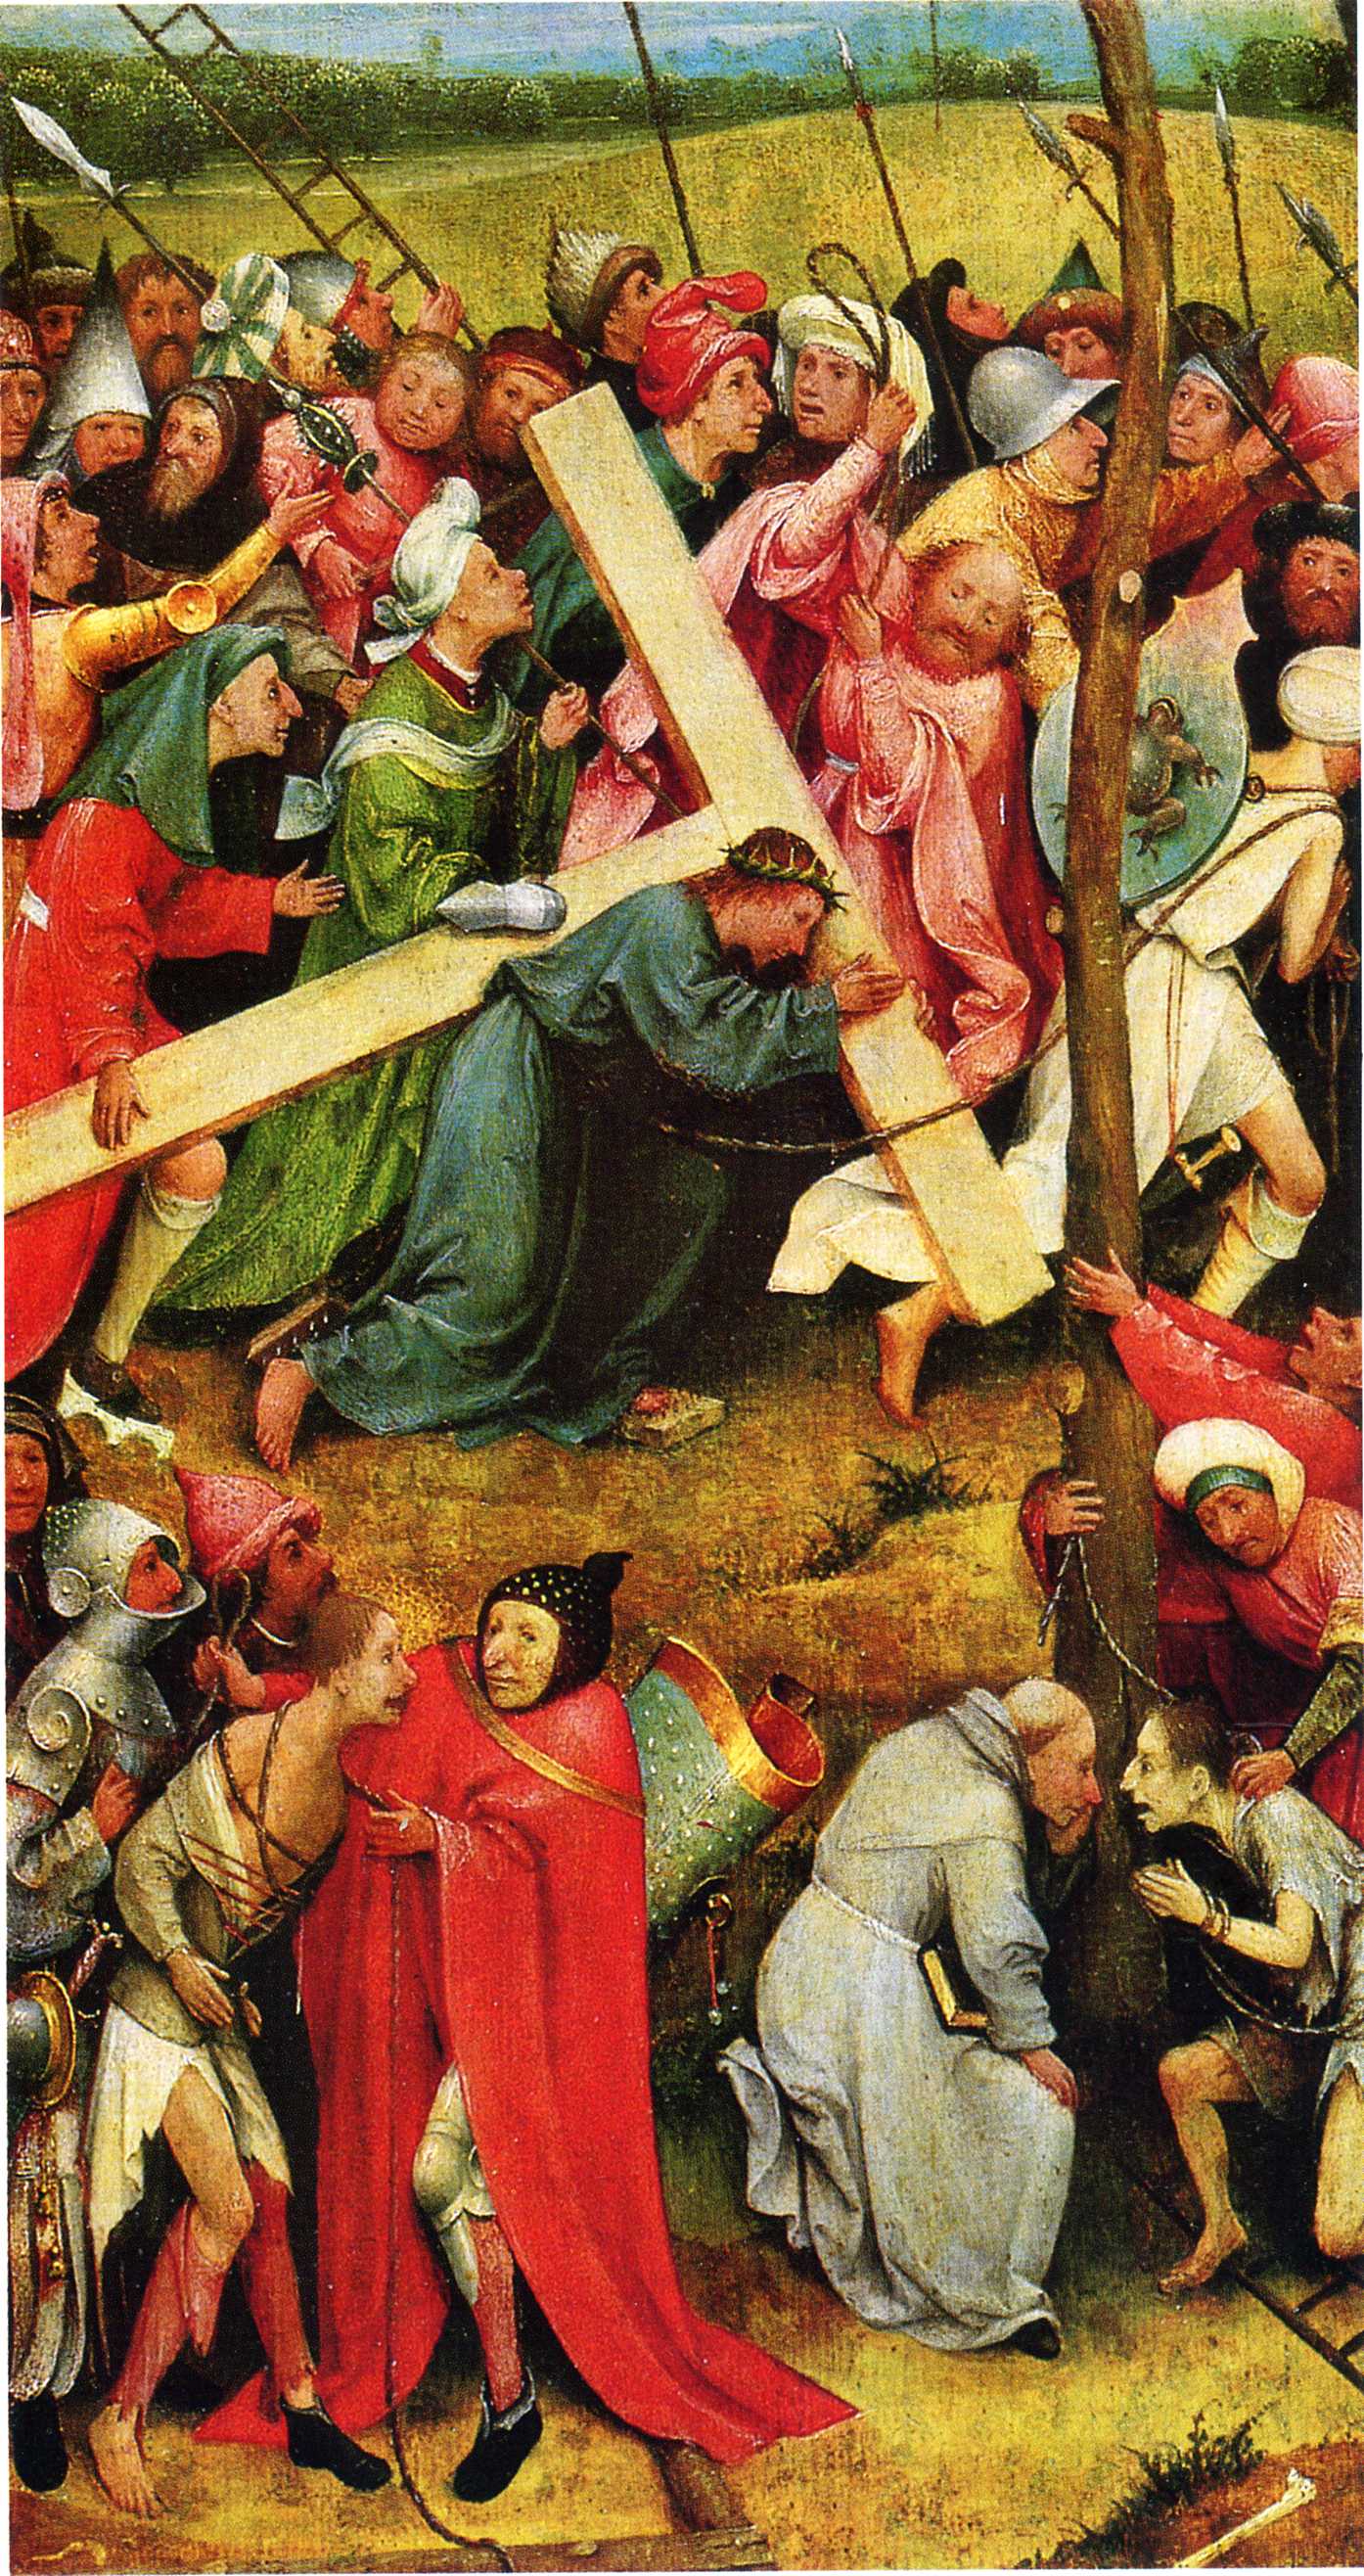 Christ Carrying the Cross (1490).